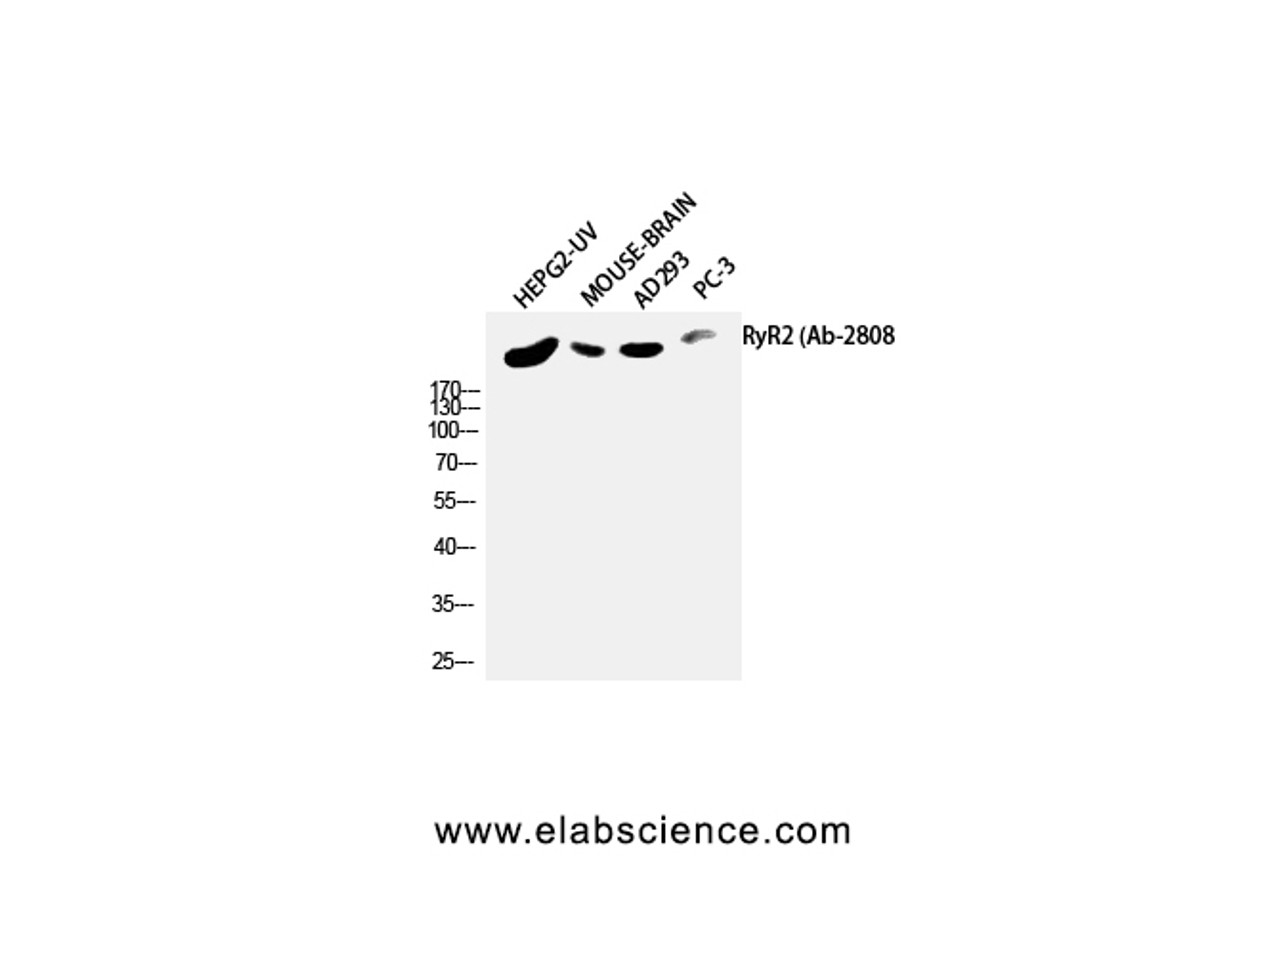 Western Blot analysis of HepG2-UV, Mouse brain, AD293T, PC-3 using RYR2 Polyclonal Antibody at dilution of 1:2000.